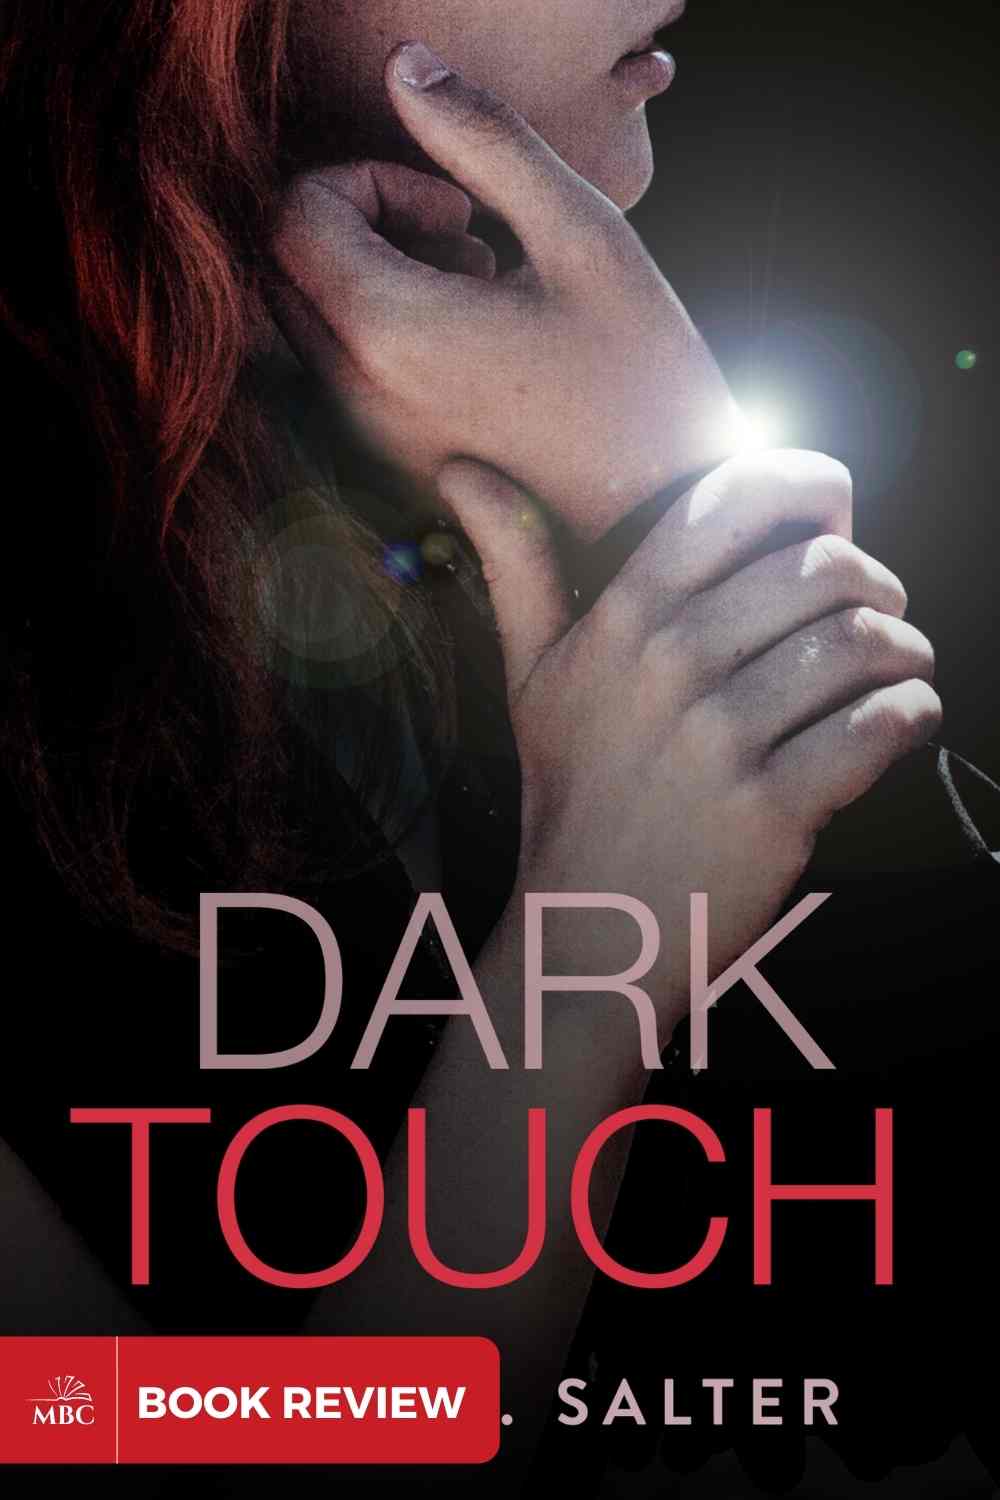 BOOK REVIEW: Dark Touch by Aimee Salter